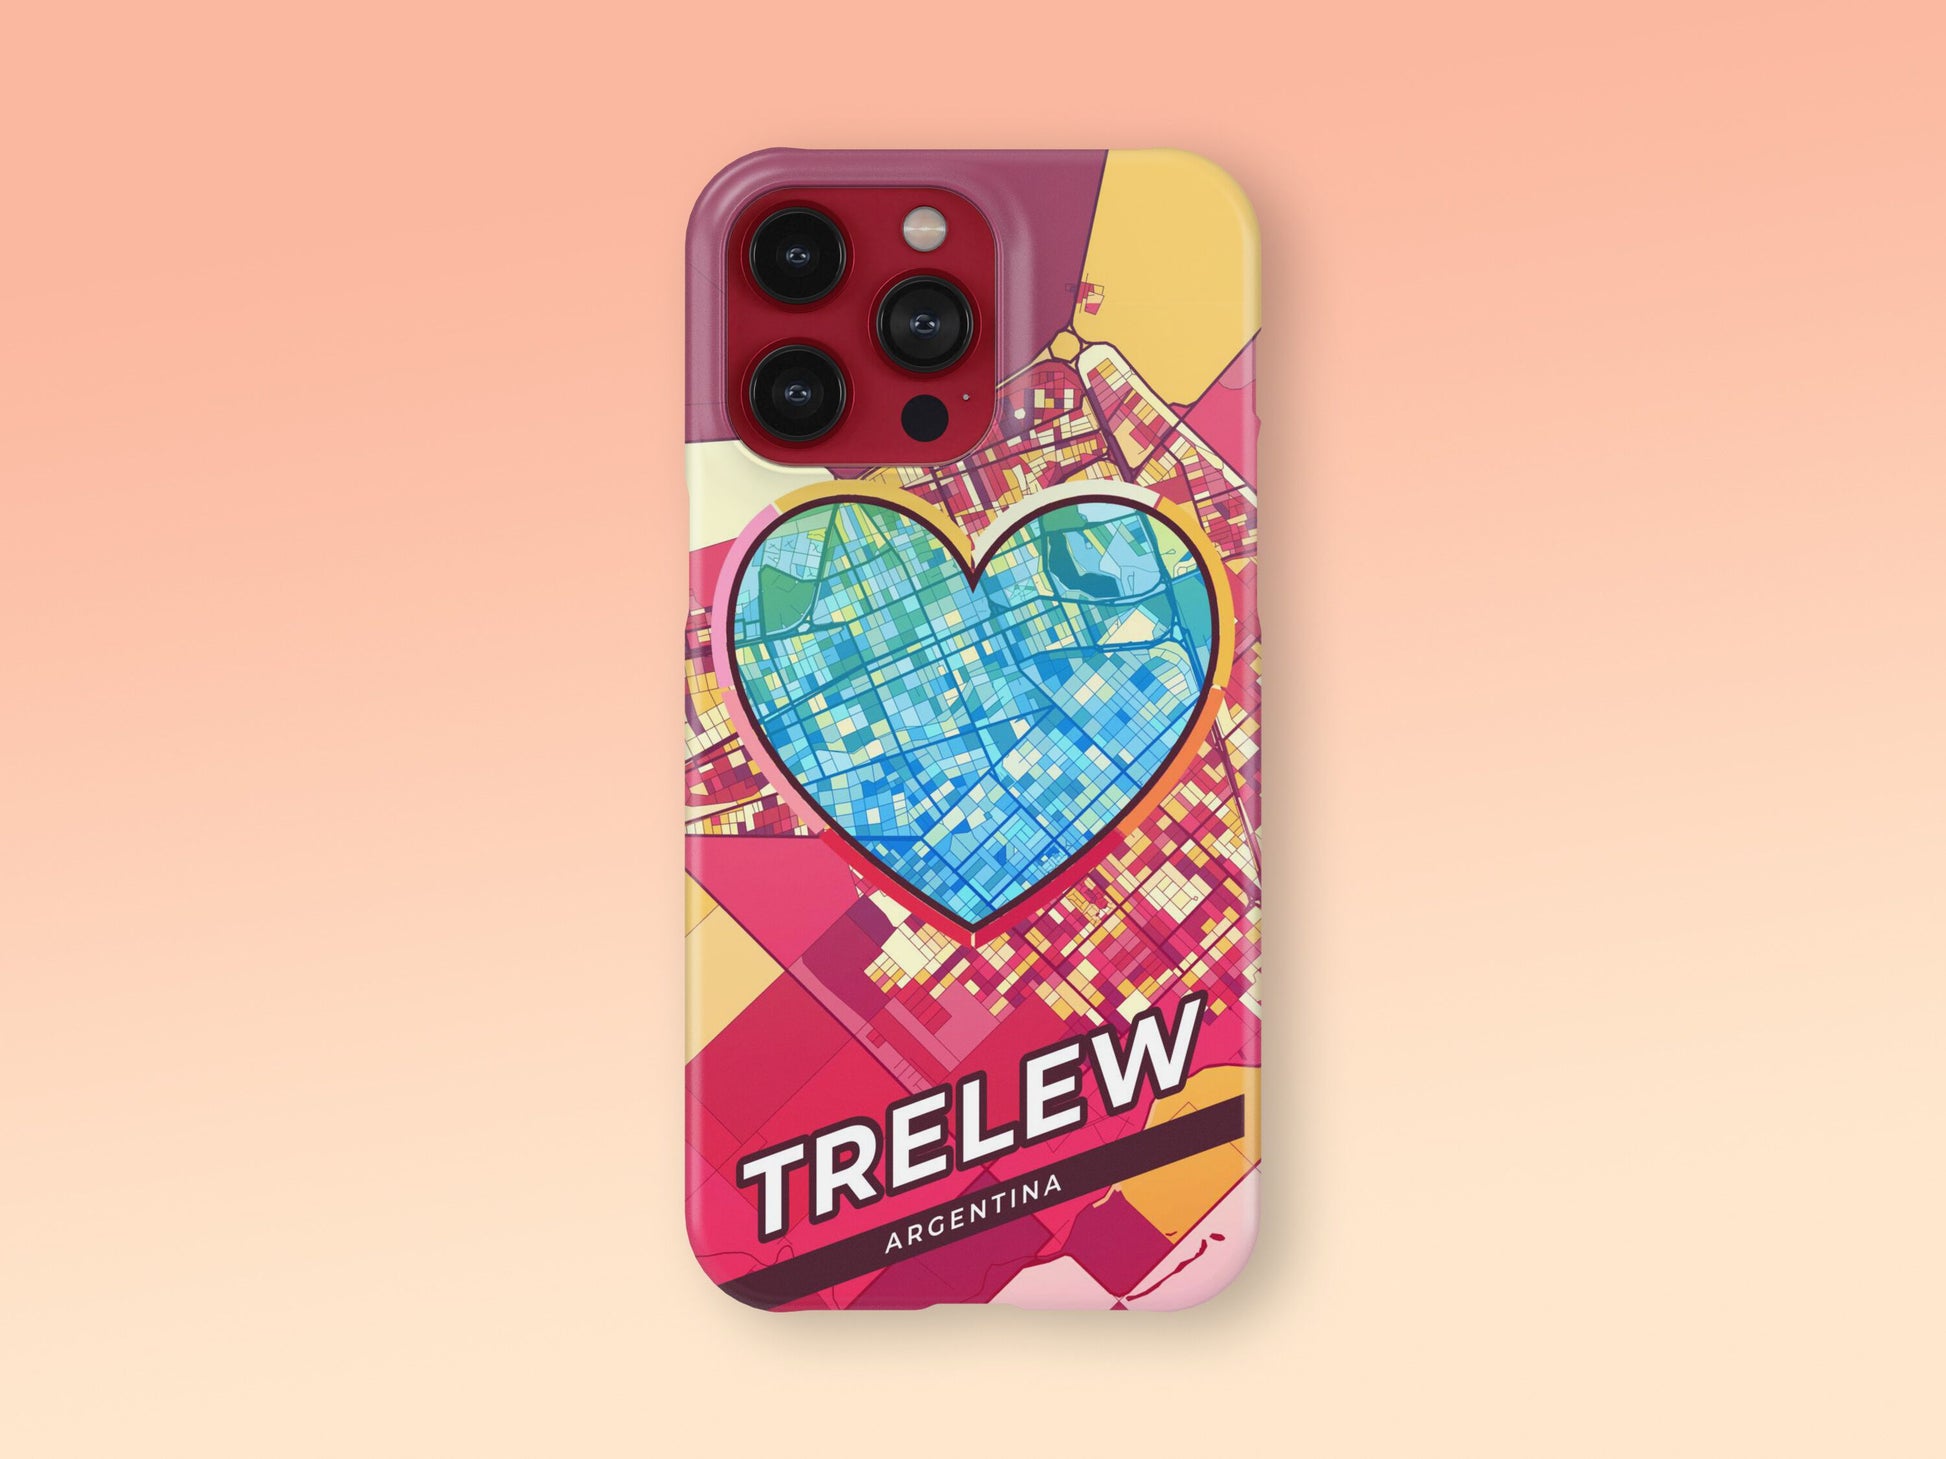 Trelew Argentina slim phone case with colorful icon. Birthday, wedding or housewarming gift. Couple match cases. 2